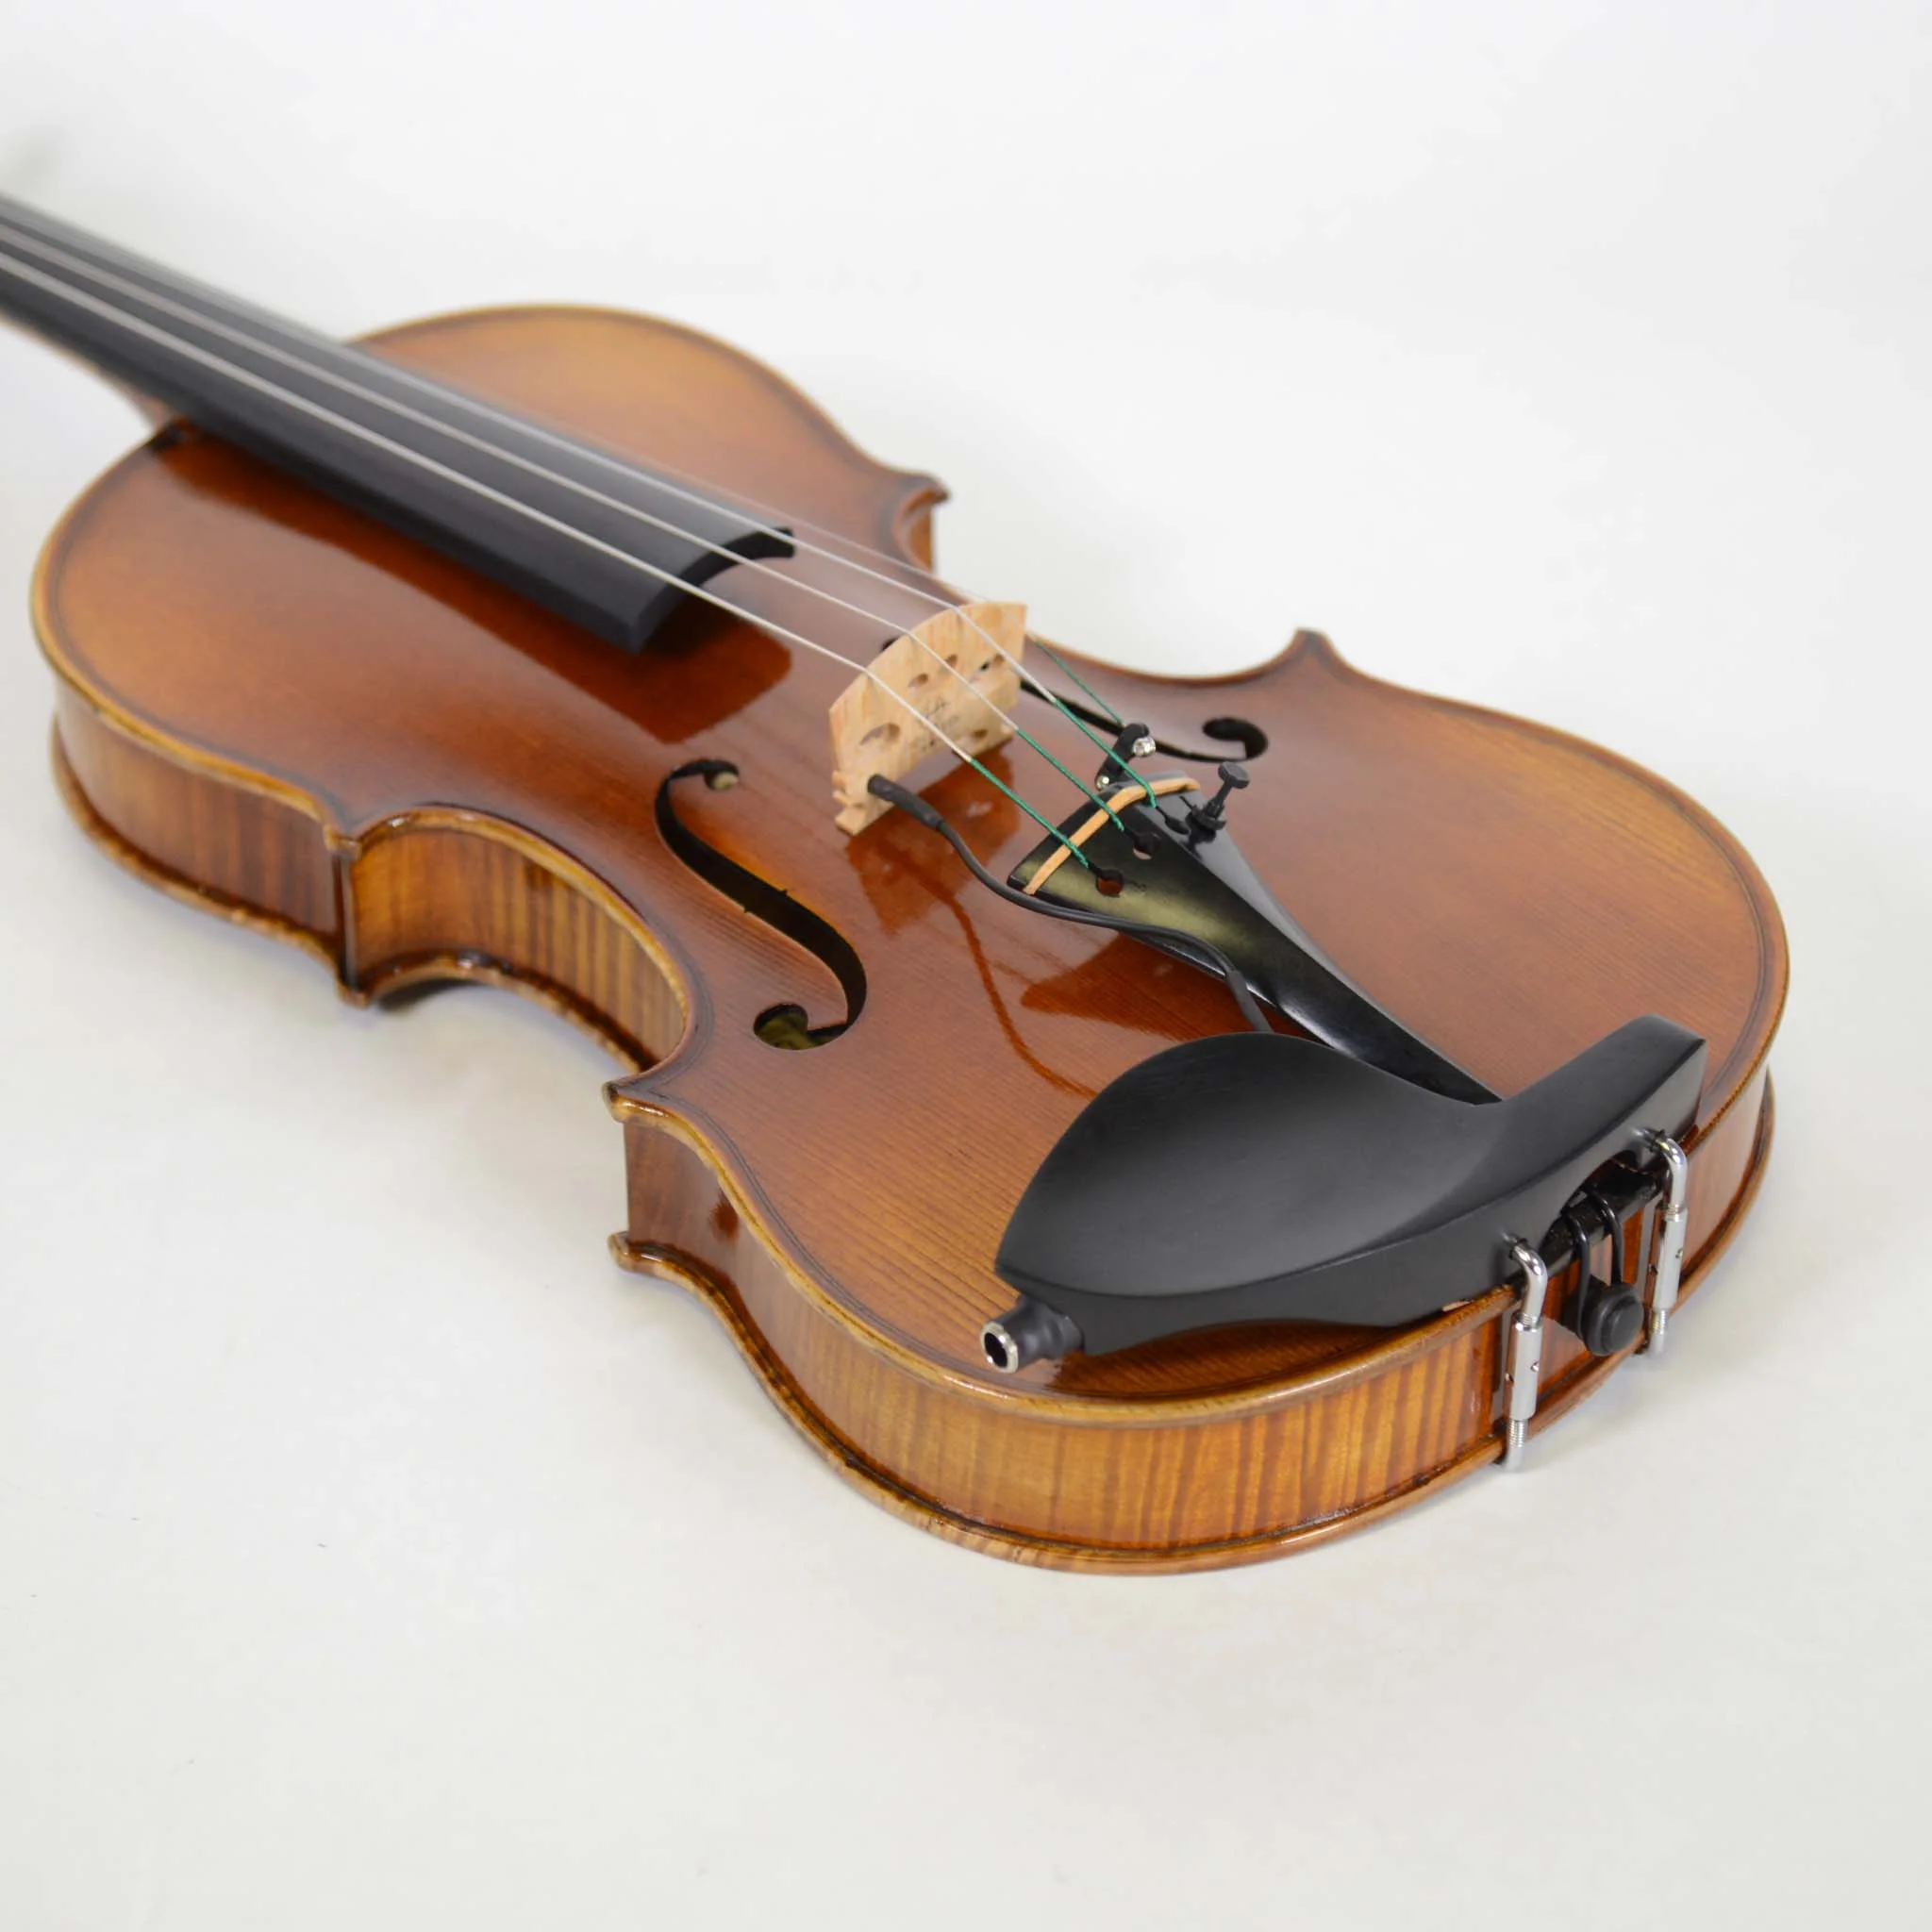 violin pickup - Skyinbow Pure Acoustic - Tri-Power Active Transducer System mounted on a violin